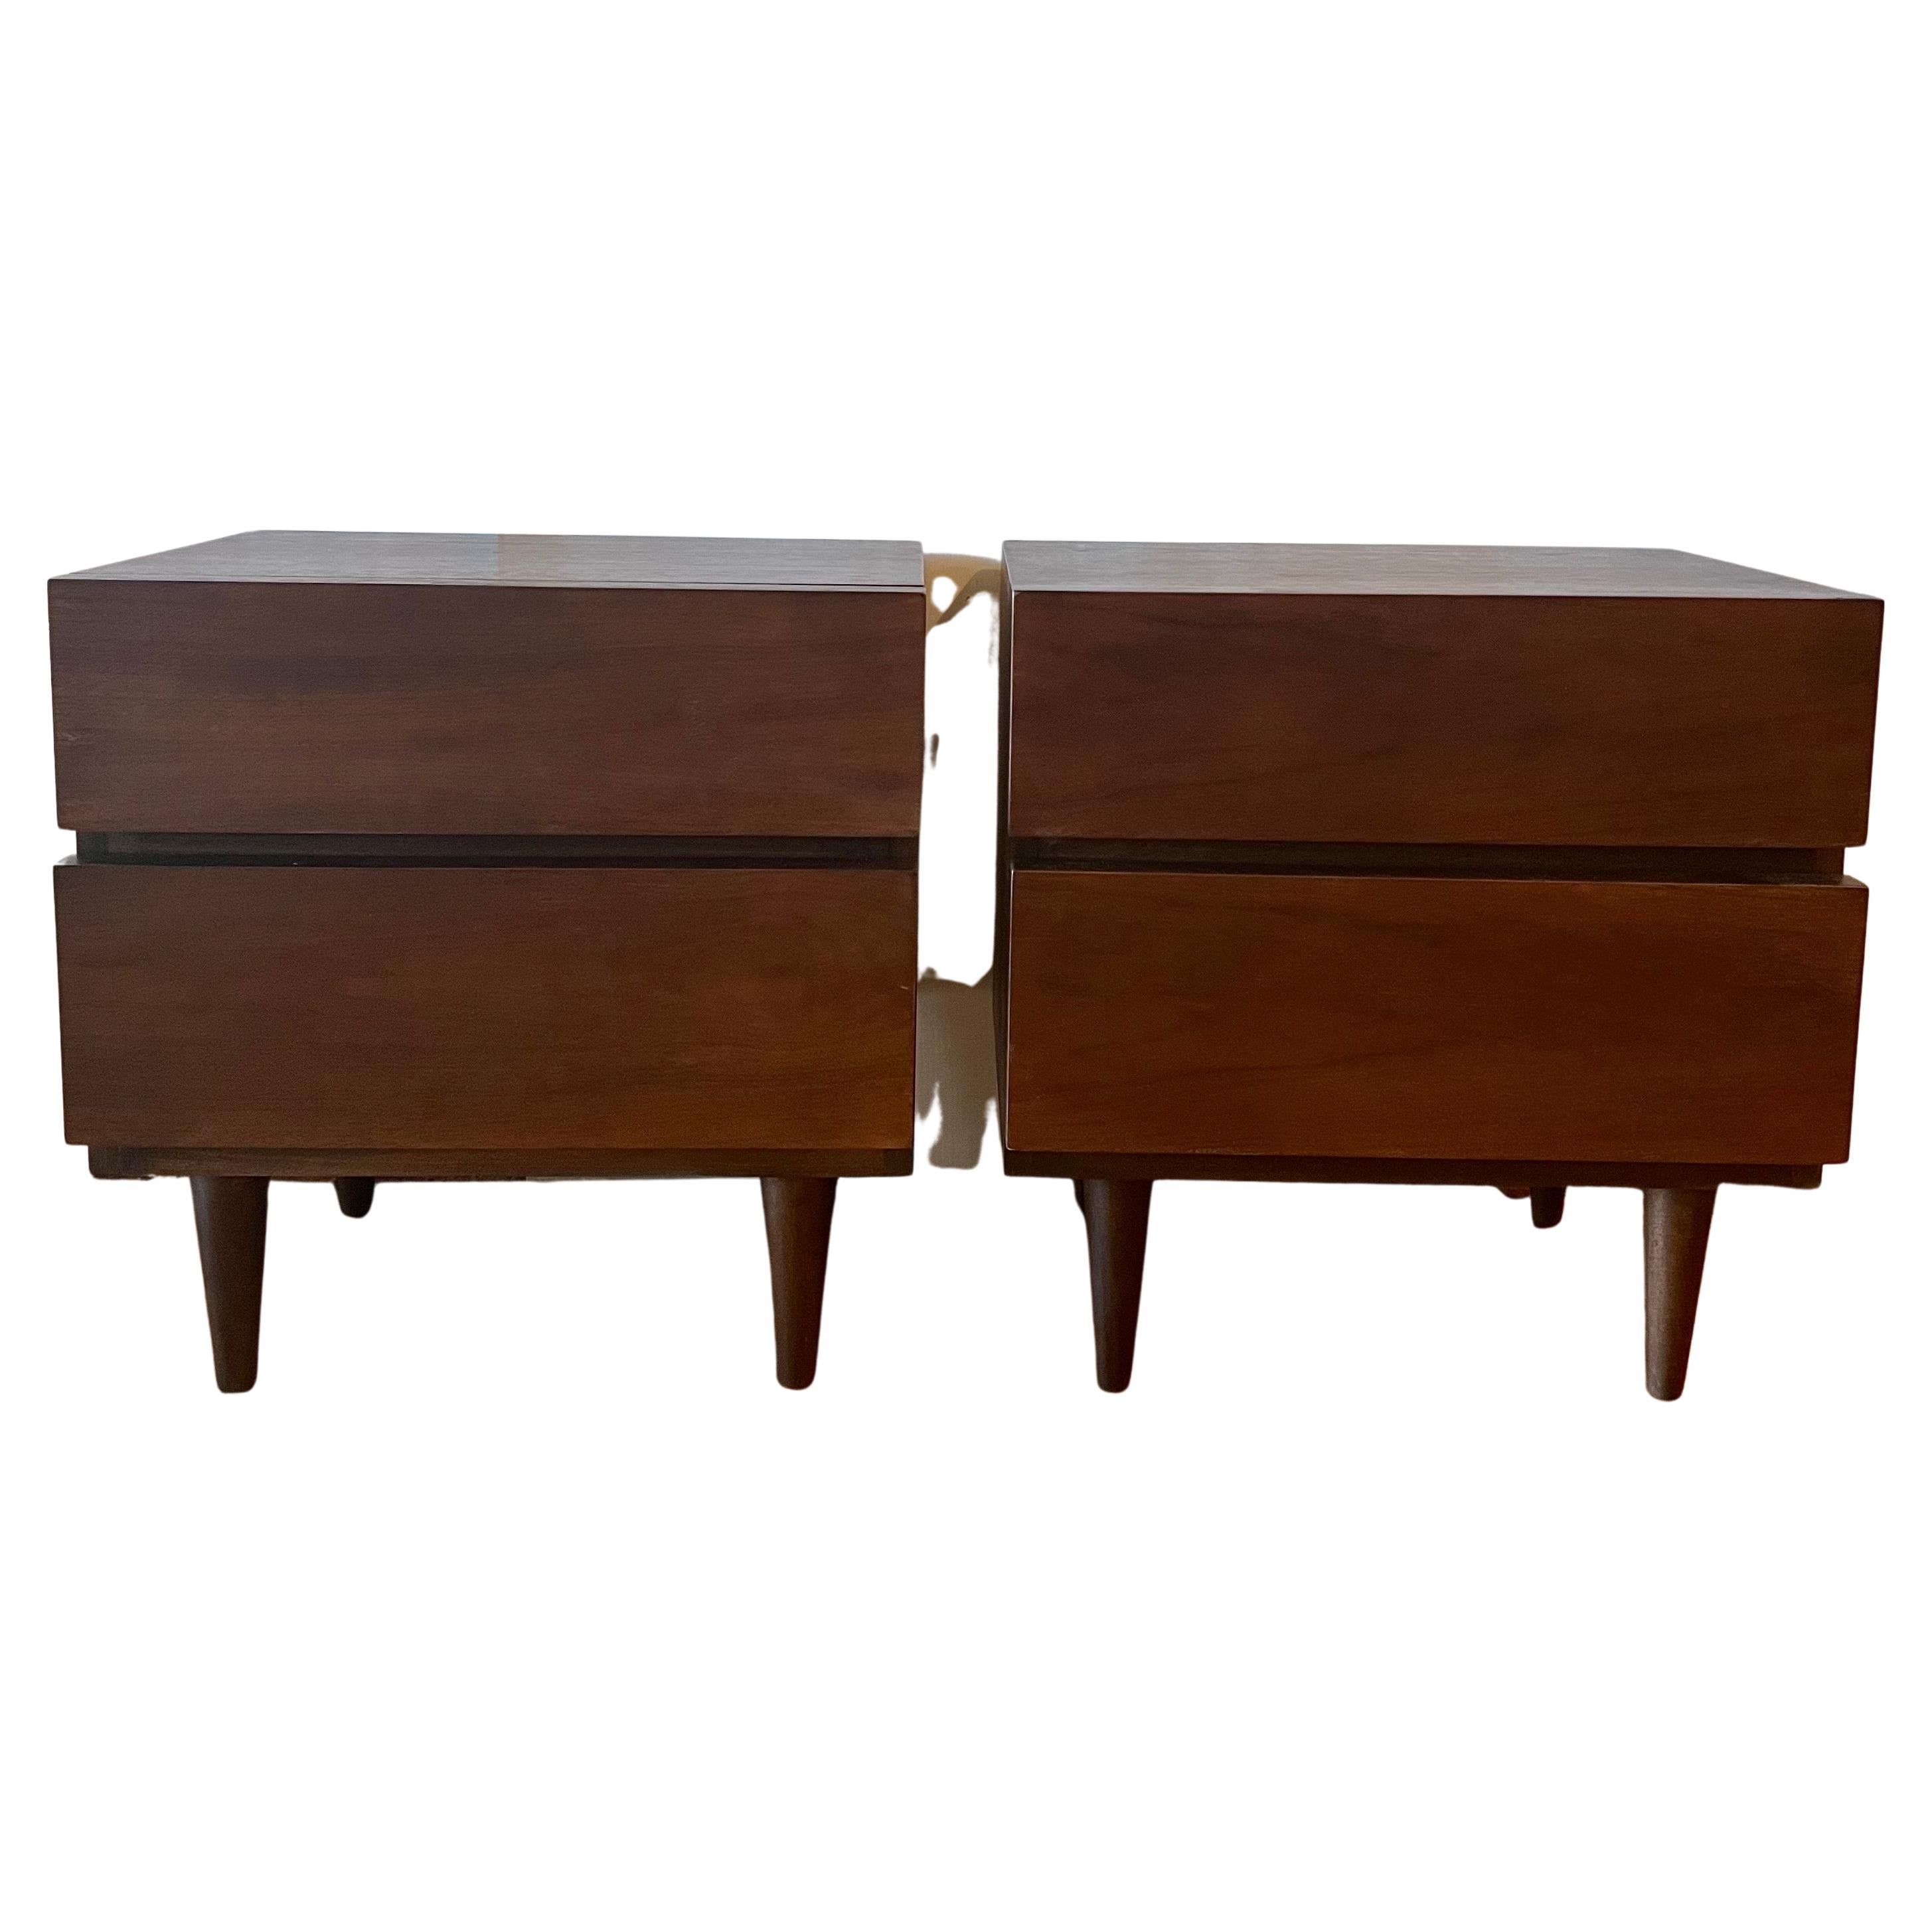 Pair of mid-century American modern walnut block front nightstands end tables, freshly refinished beautiful lines, and good looking.